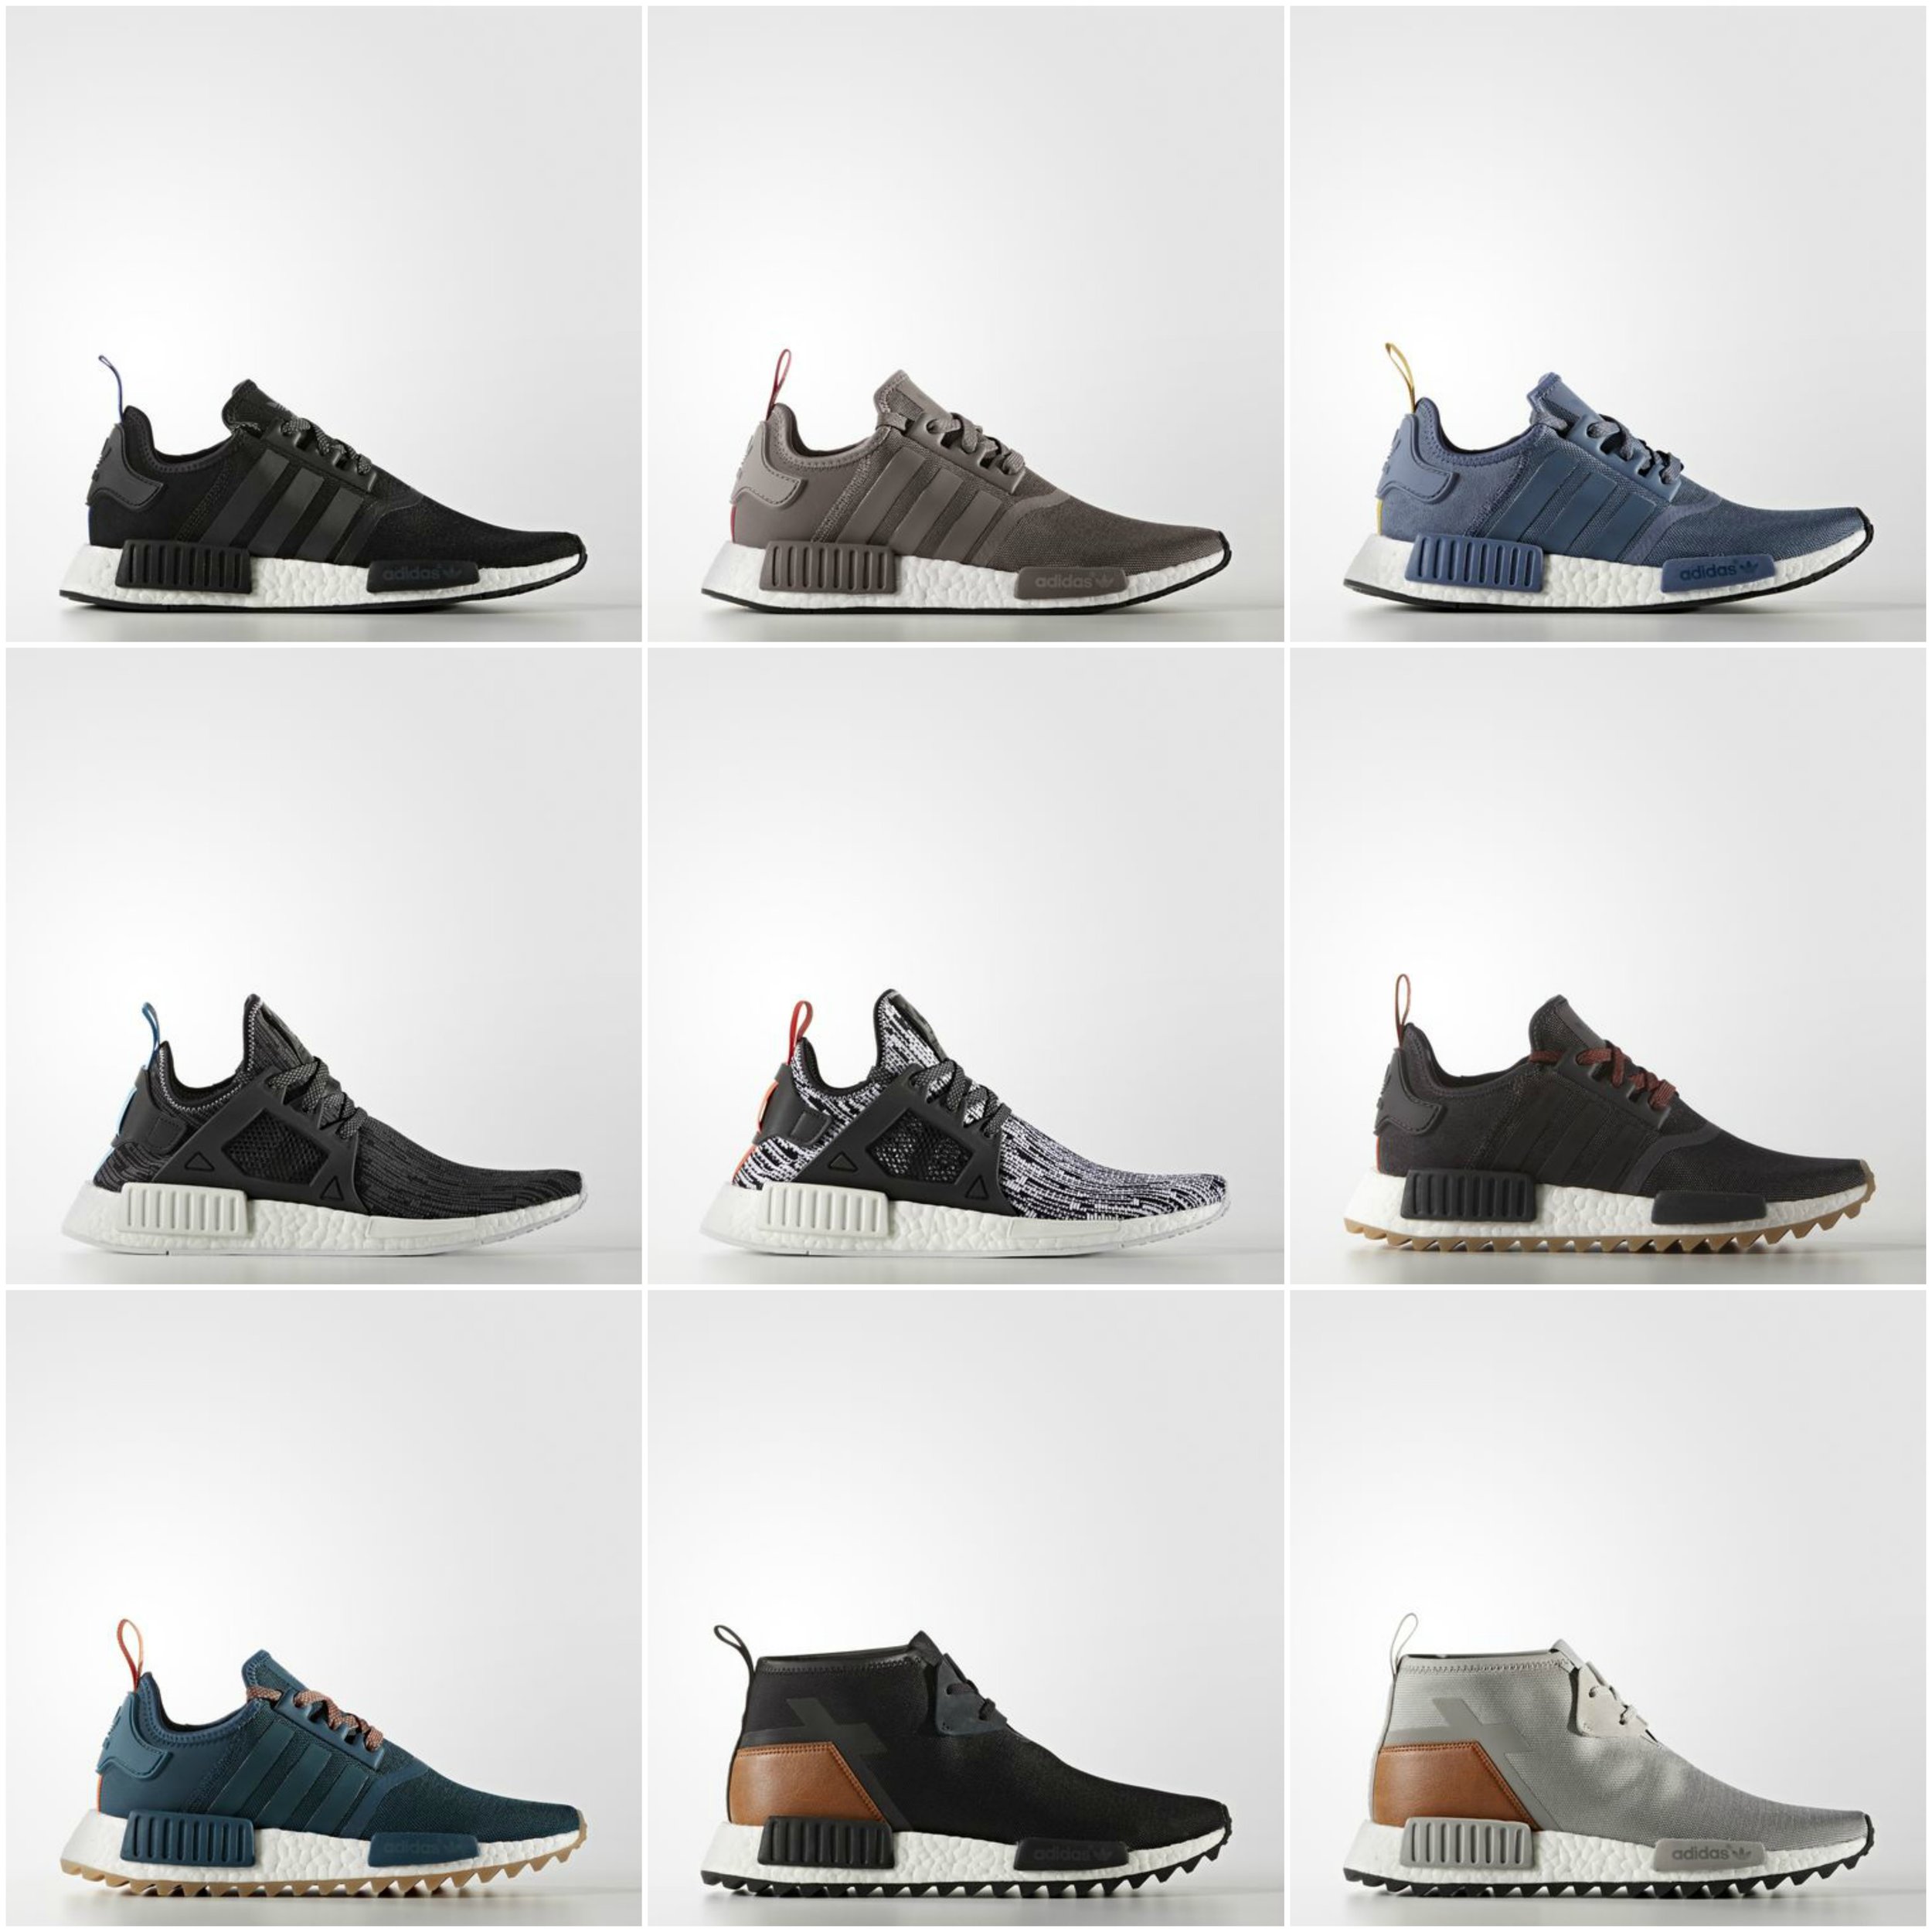 More Adidas NMD Release — Sneaker Shouts